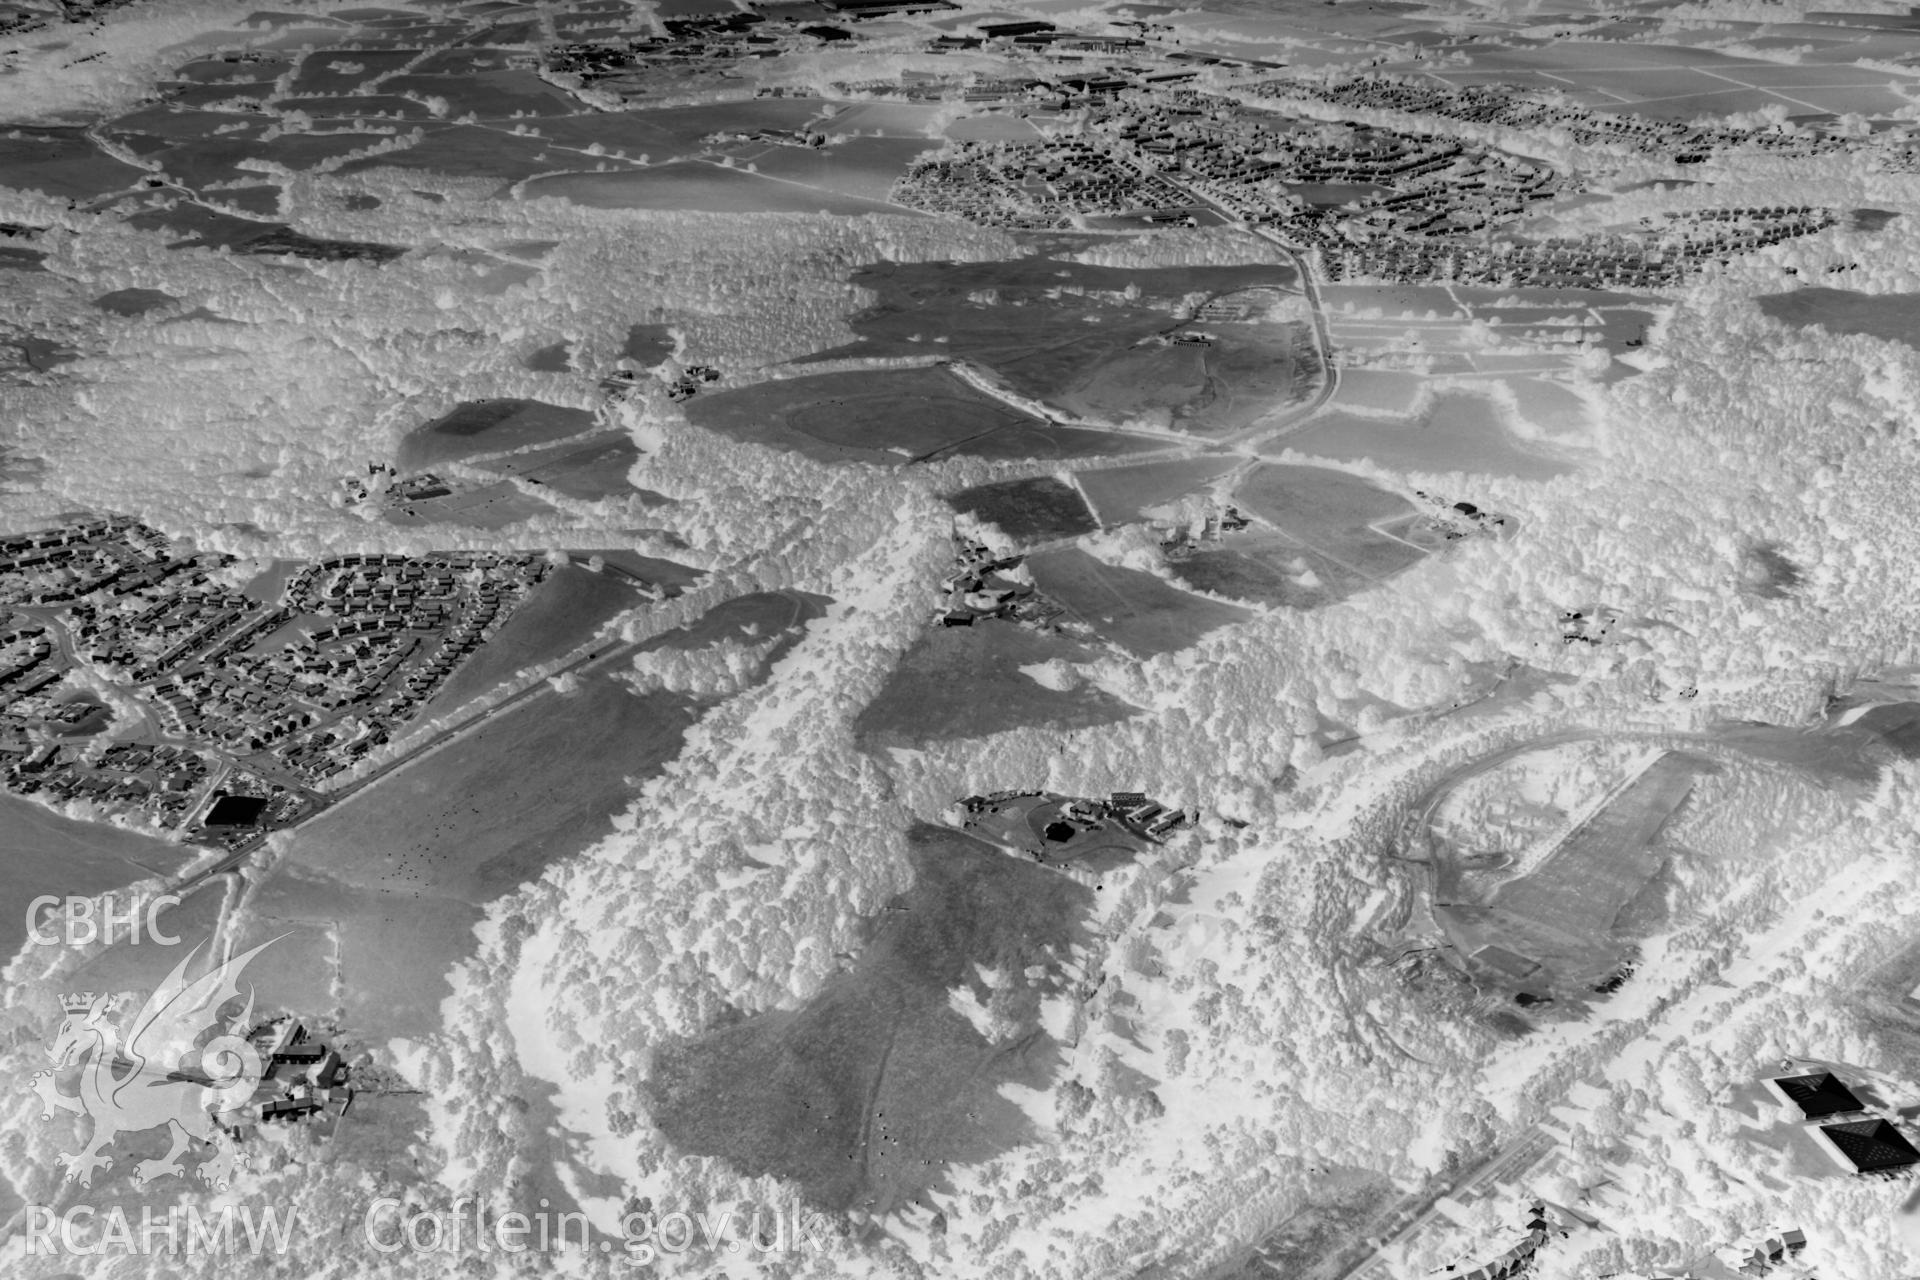 Digital black and white photograph showing Bryn Alyn Hillfort and the surrounding area.